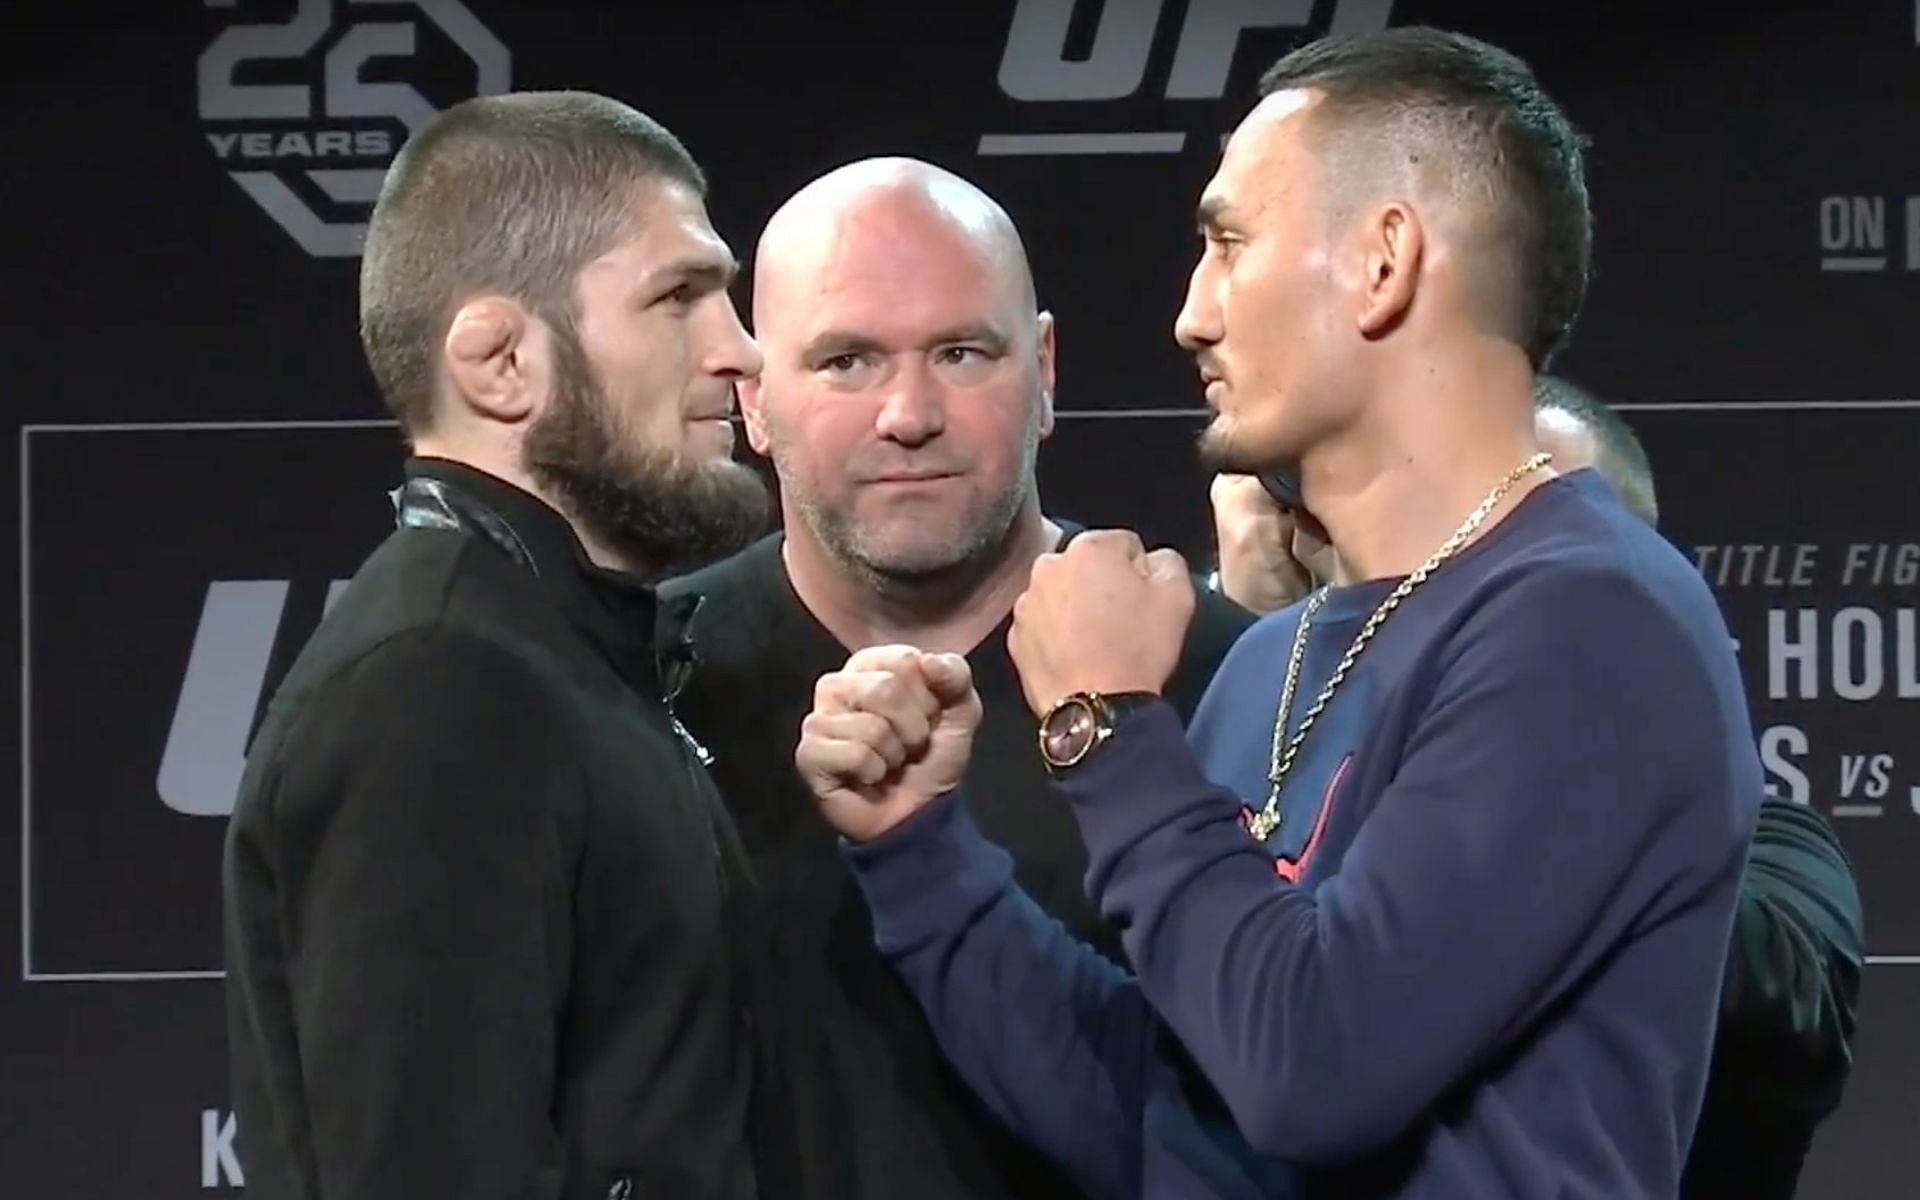 Max Holloway has announced ‘The First Metaverse Fight in the History of the Earth’ against Khabib Nurmagomedov
